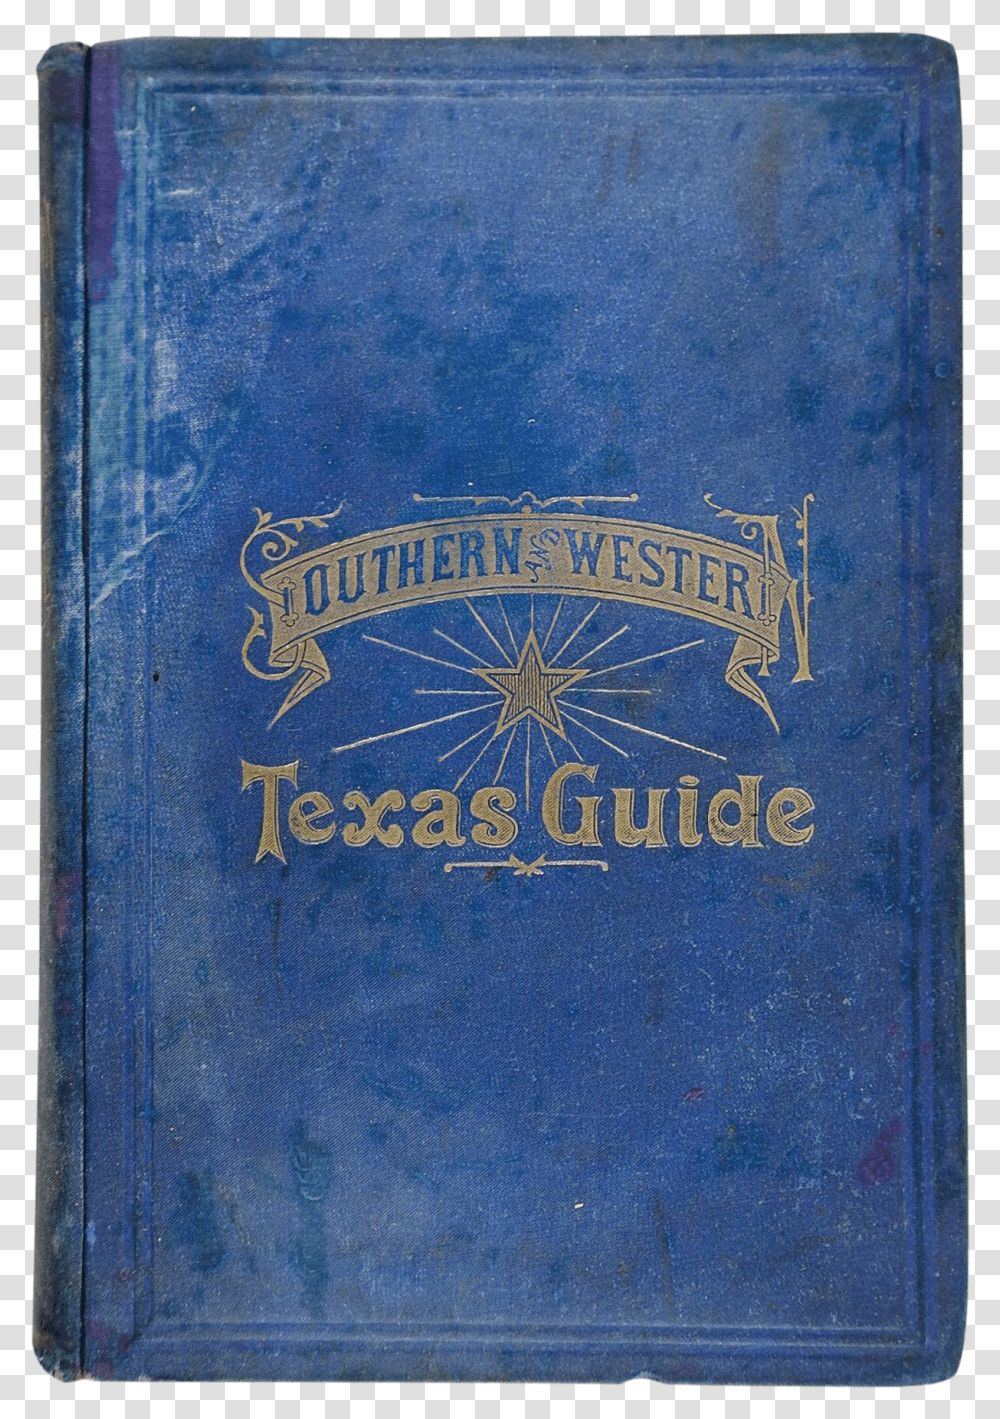 Southern And Western Texas Guide Horizontal Transparent Png